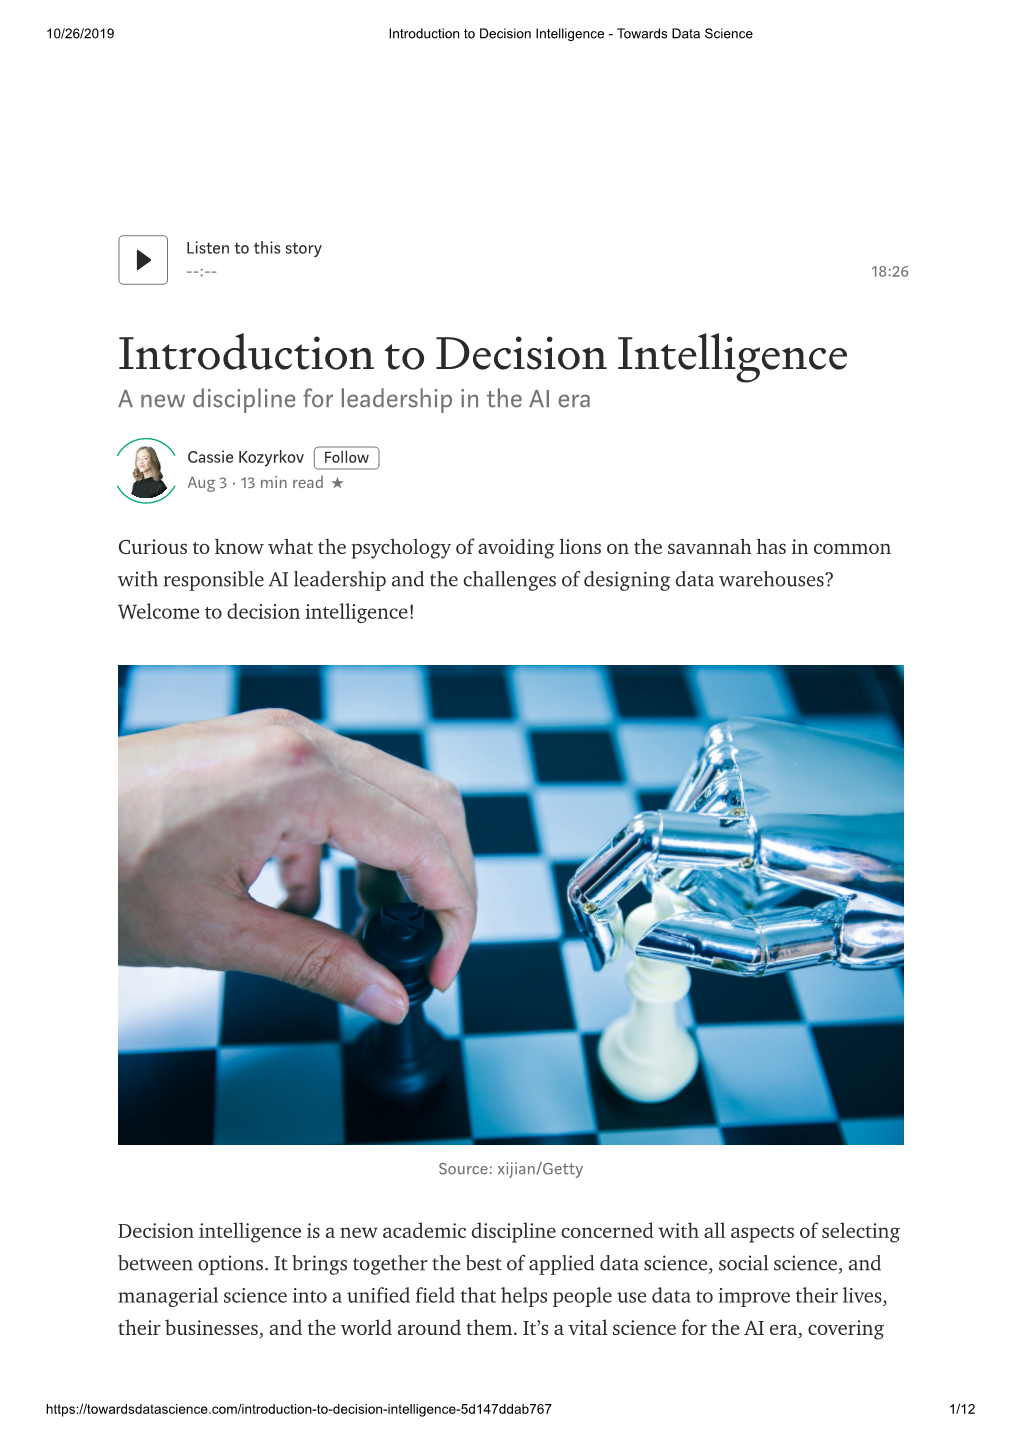 Introduction to Decision Intelligence - Towards Data Science